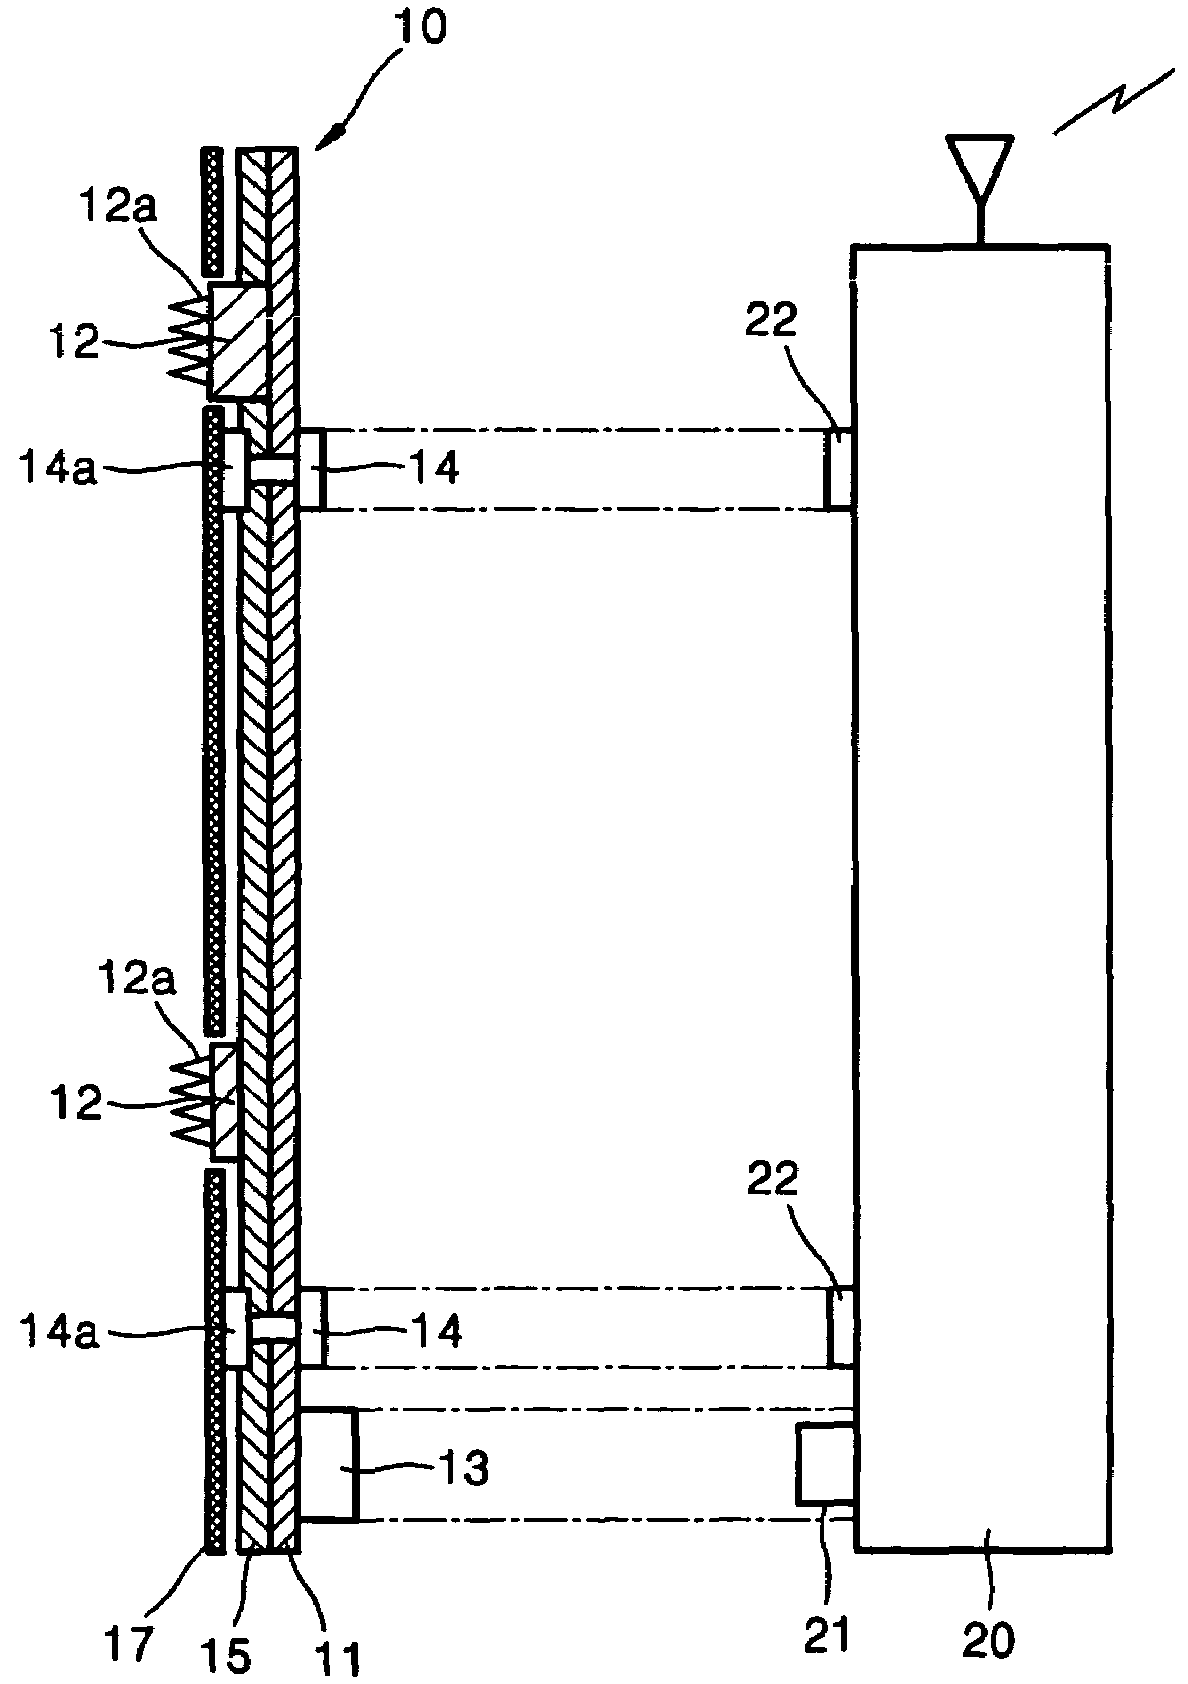 Body surface bio-potential sensor having multiple electrodes and apparatus including the same